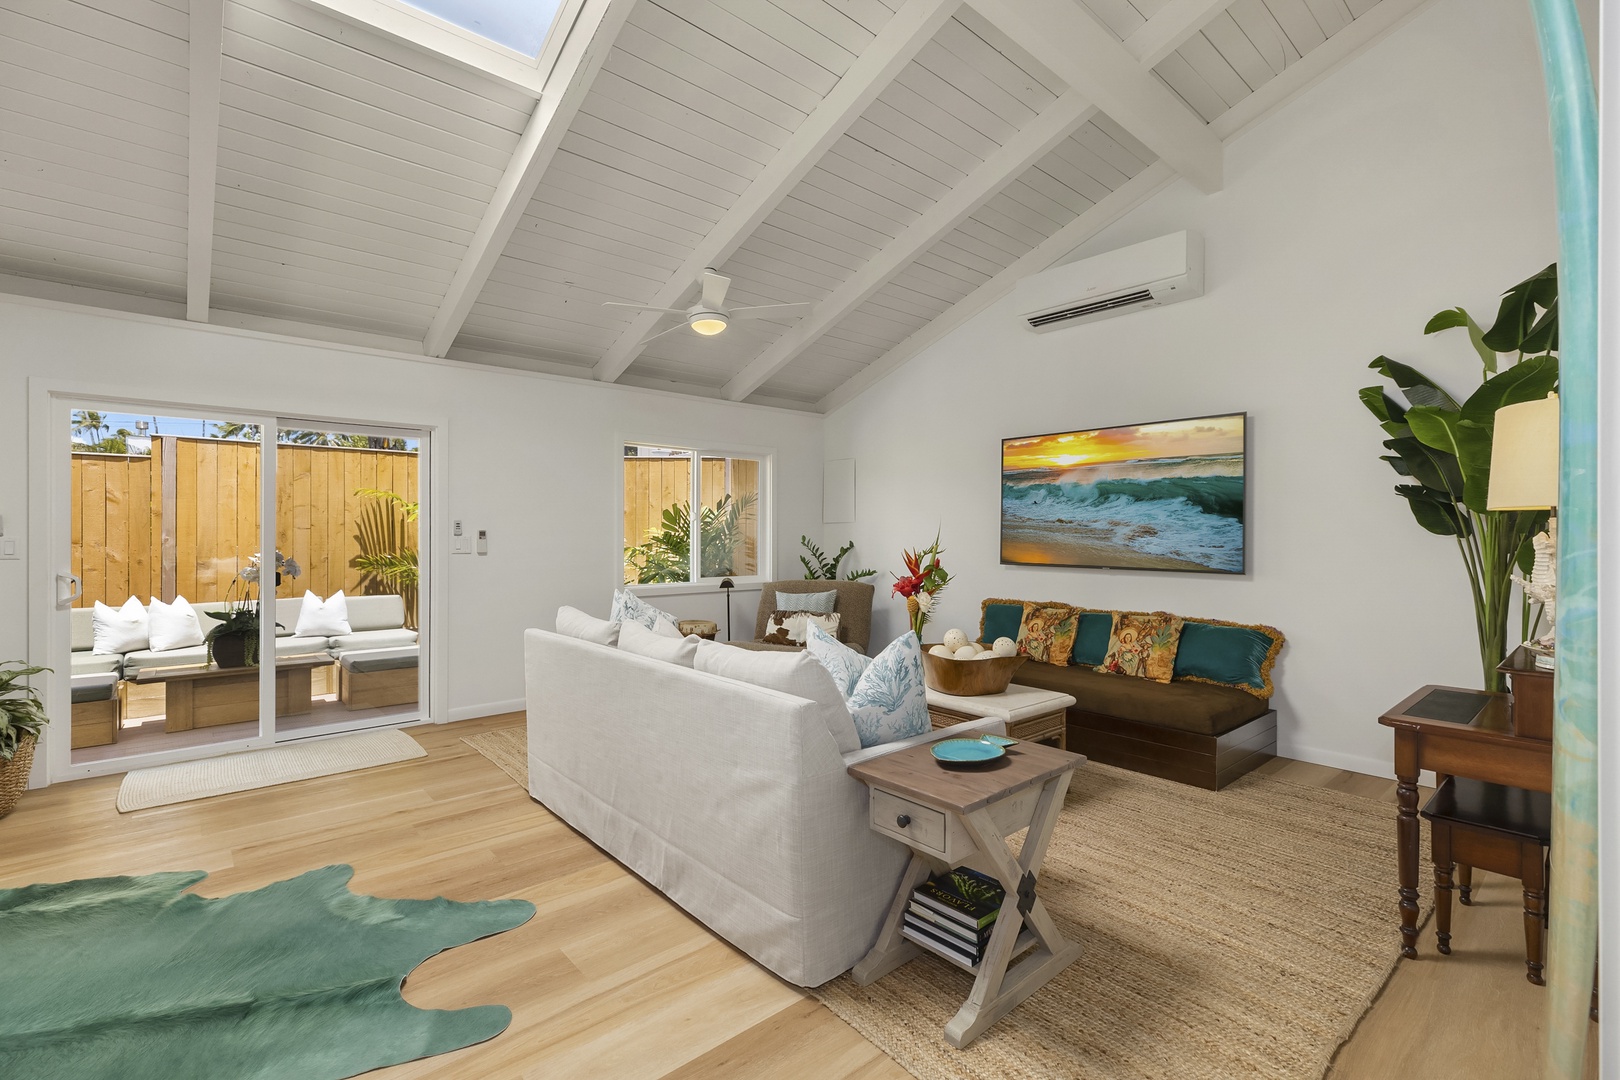 Kailua Vacation Rentals, Ranch Beach House - Living Room opens up to private outdoor lanai.